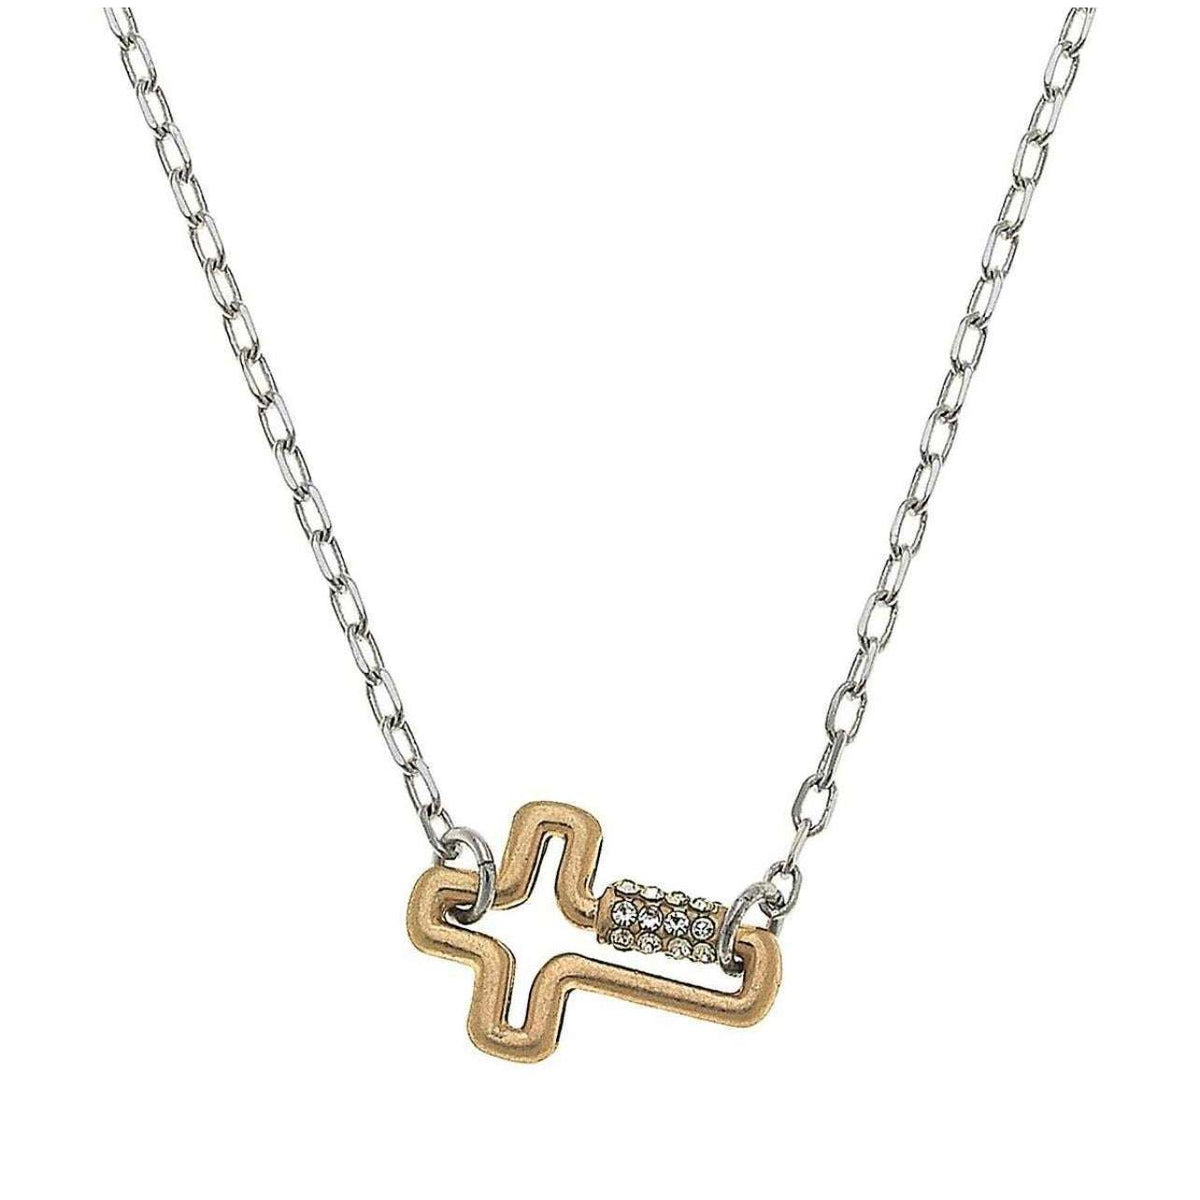 Keeks Mini Cross Two-Tone Necklace - The Hive by Chris Jesselle